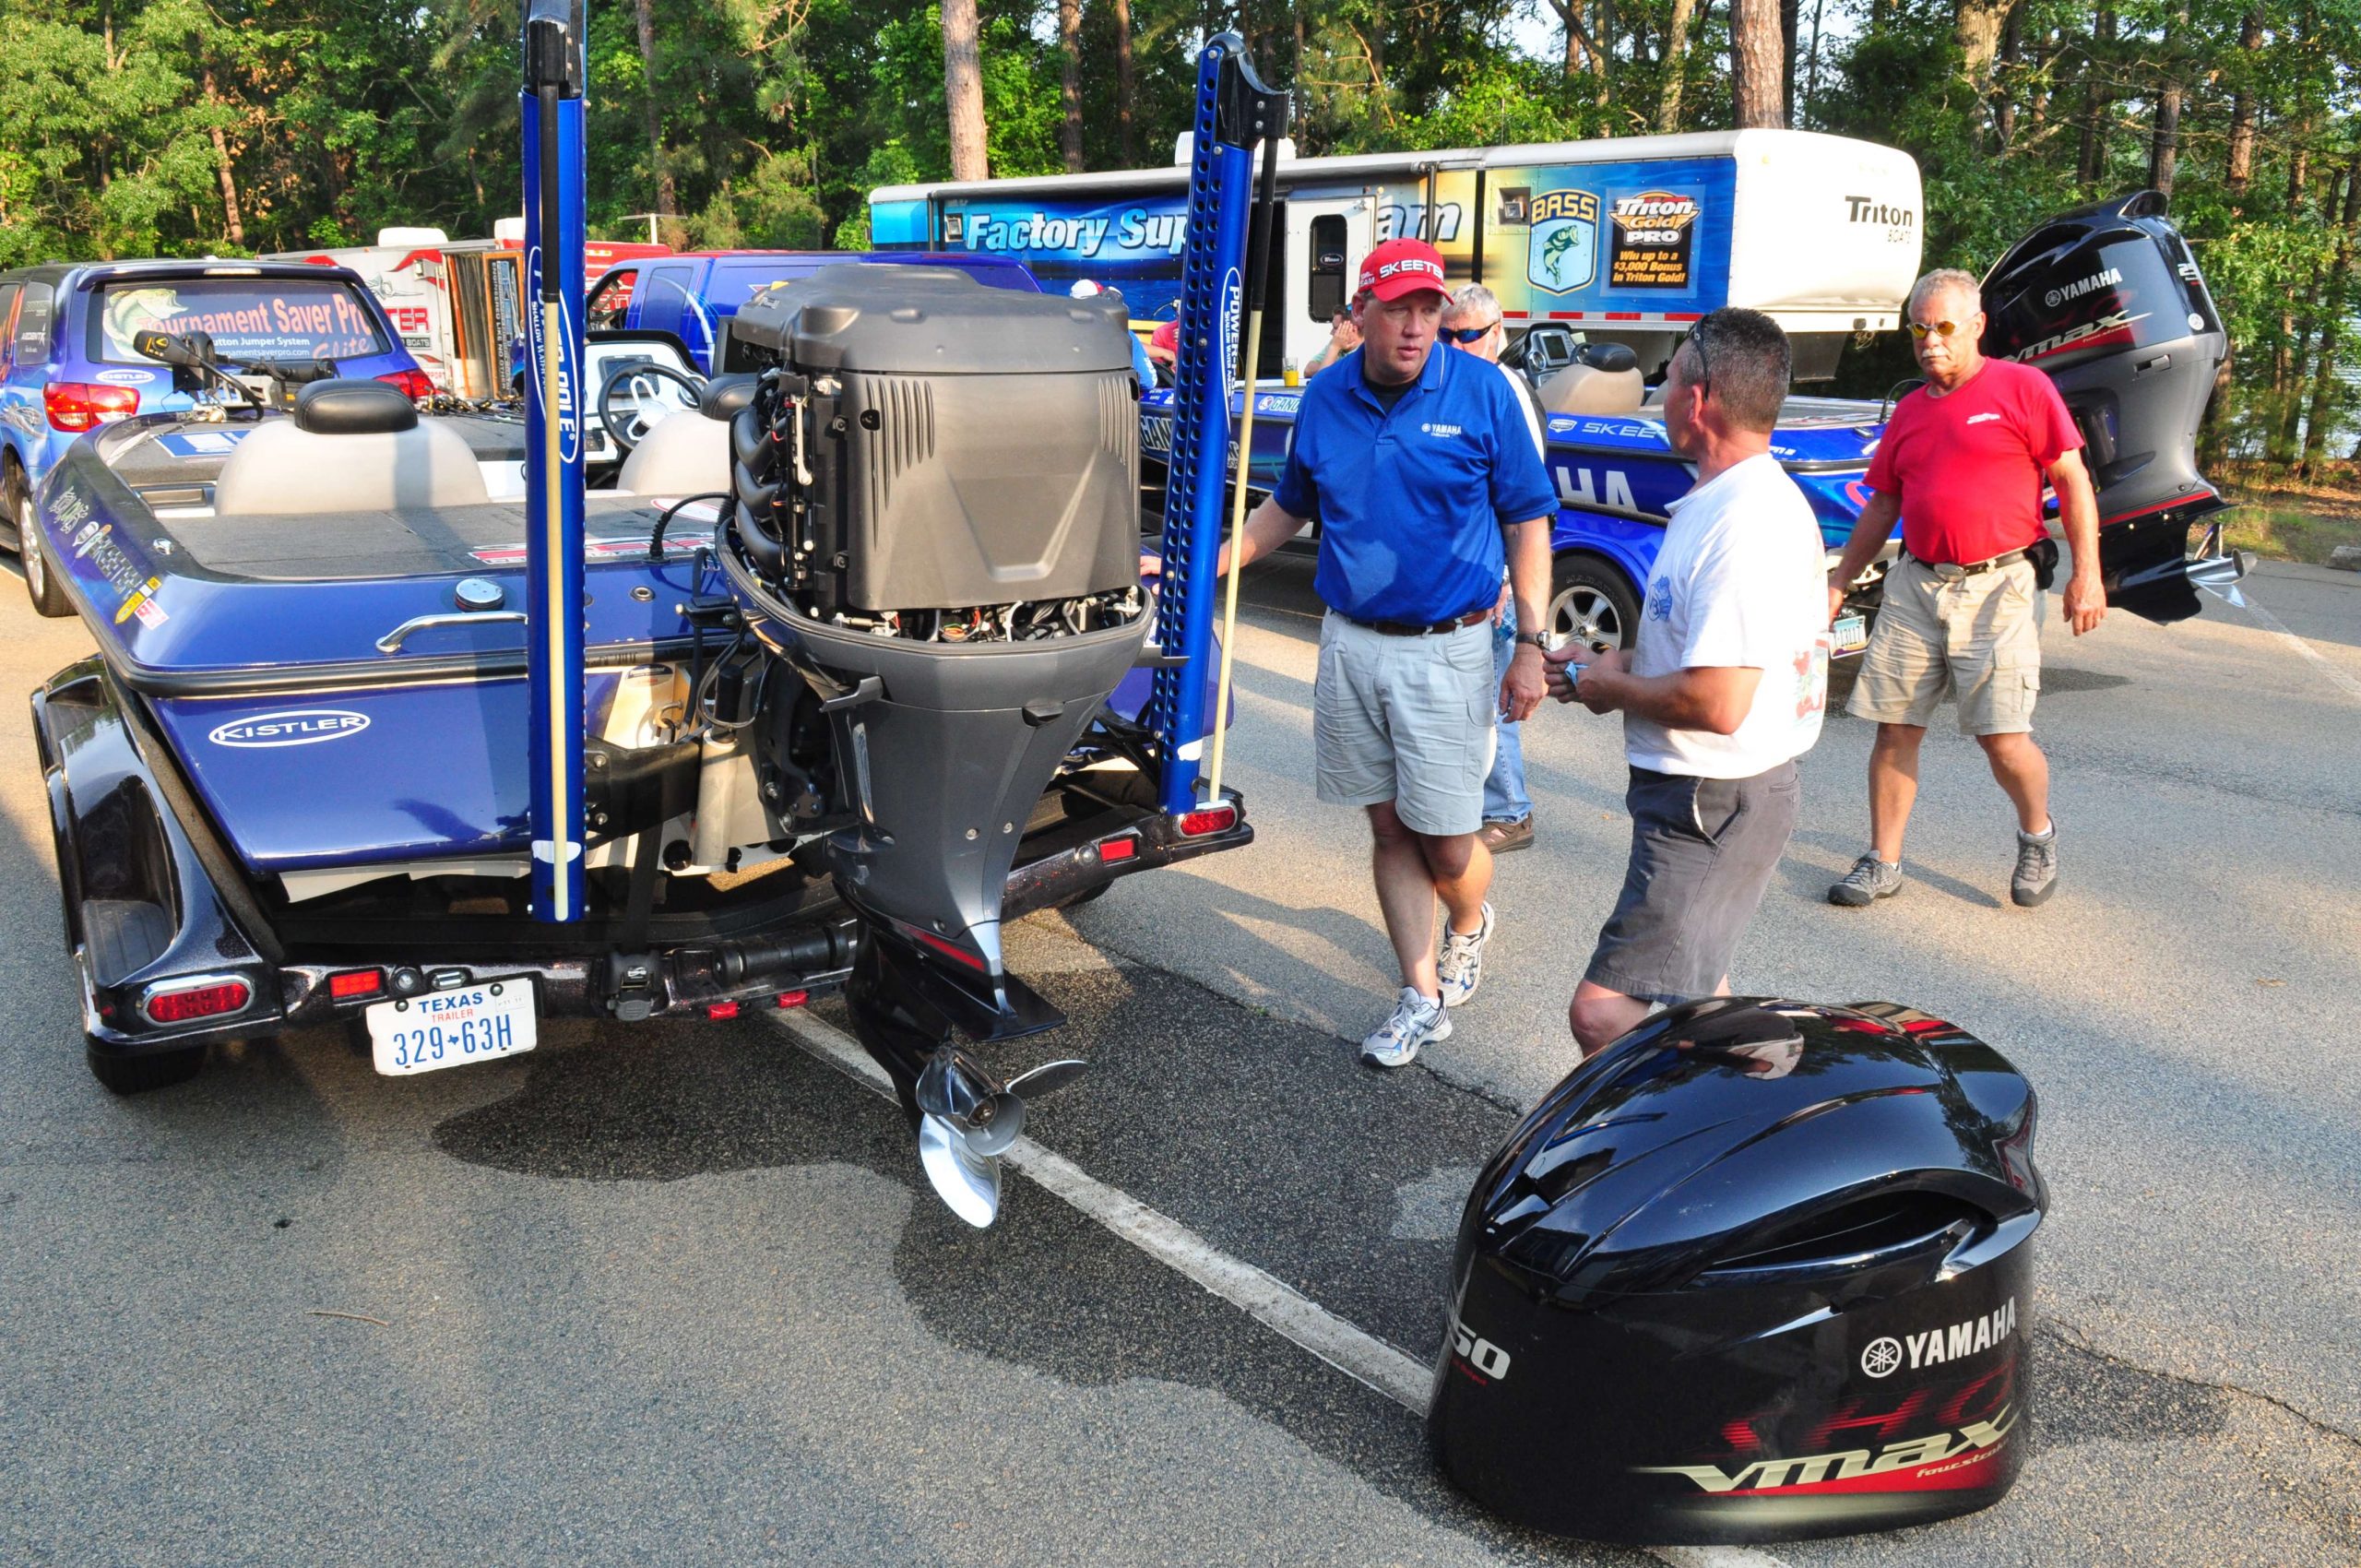 <p>
	At the Yamaha service trailer, Jones gets anew prop and checks the oil on his VMax SHO.</p>
